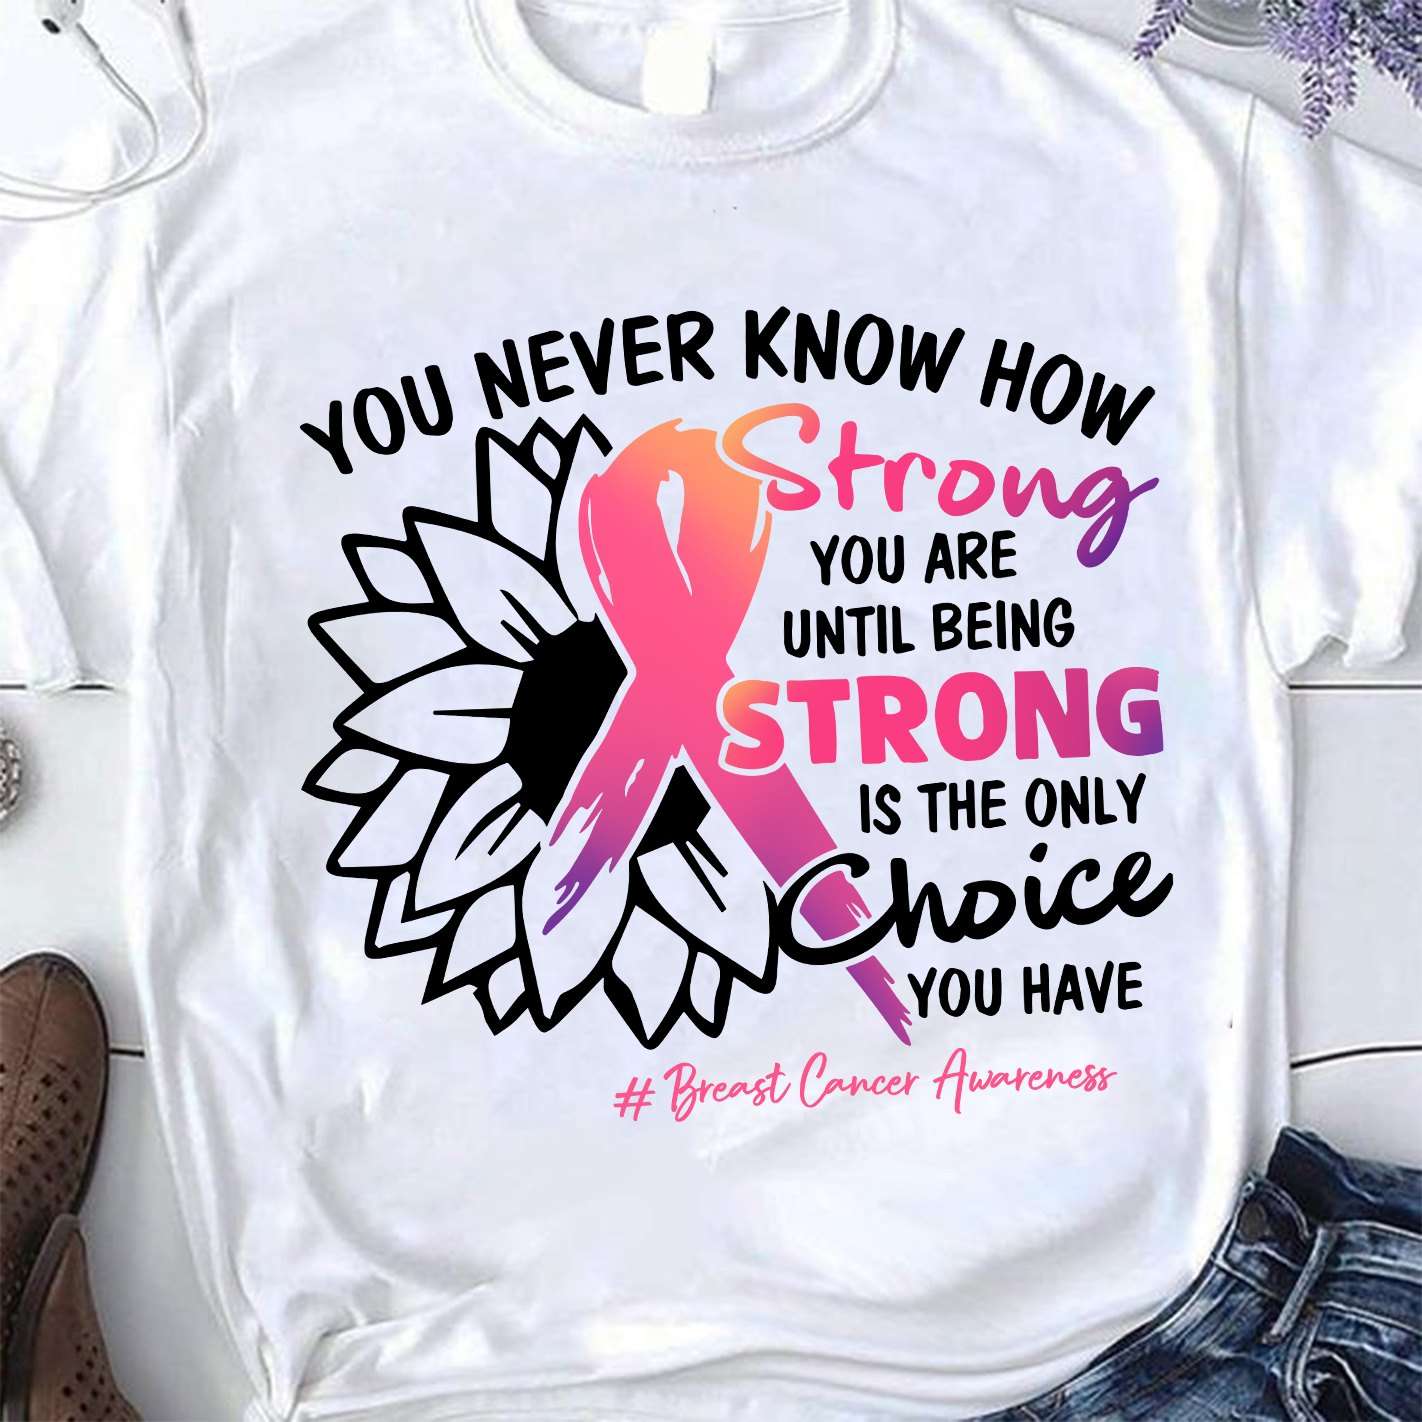 You never know how strong you are until being strong is the only choice you have - Breast Cancer Sunflower Ribbon